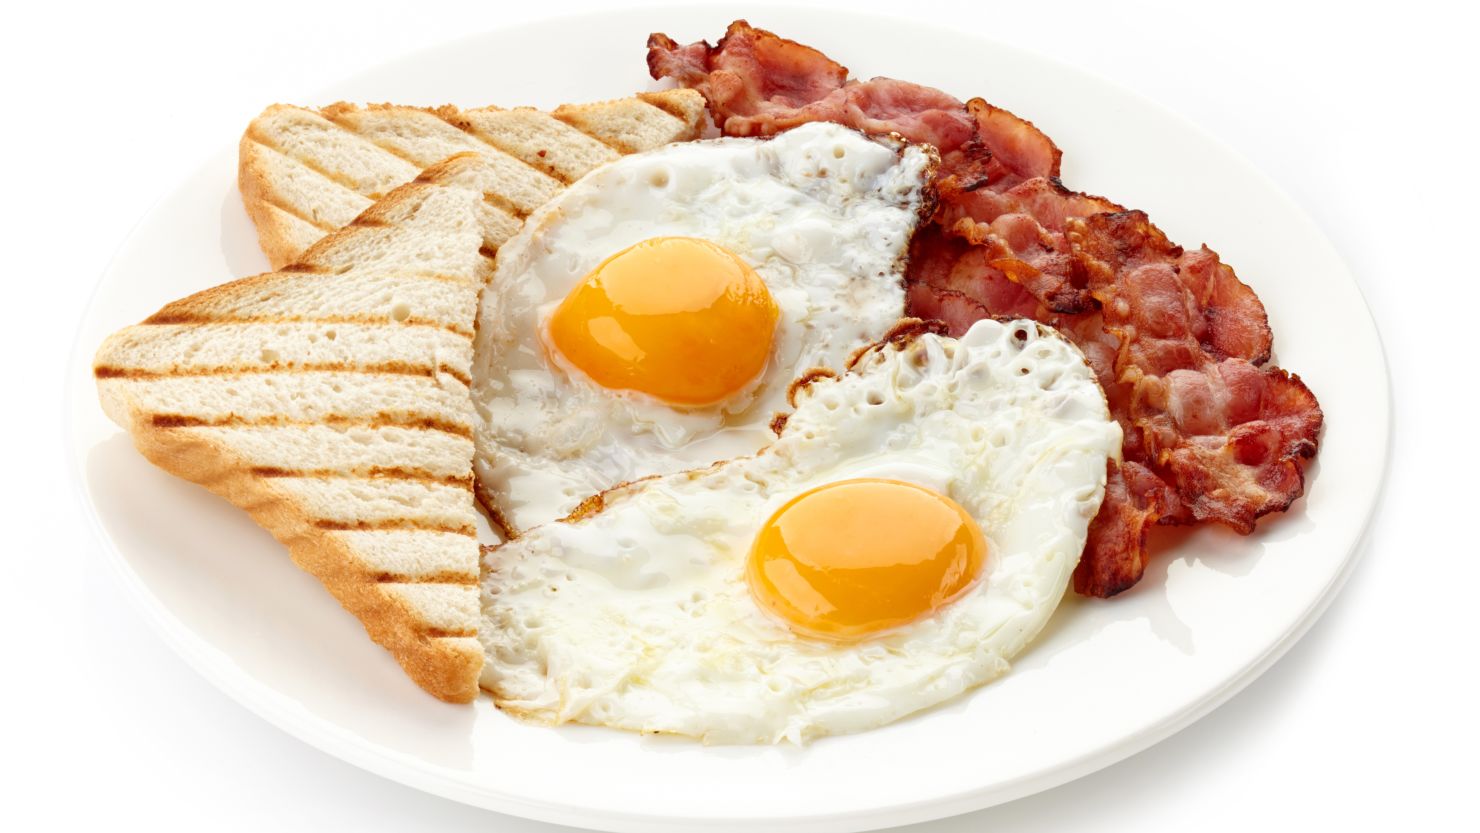 Munching in the morning doesn't have a direct effect on dropping pounds.